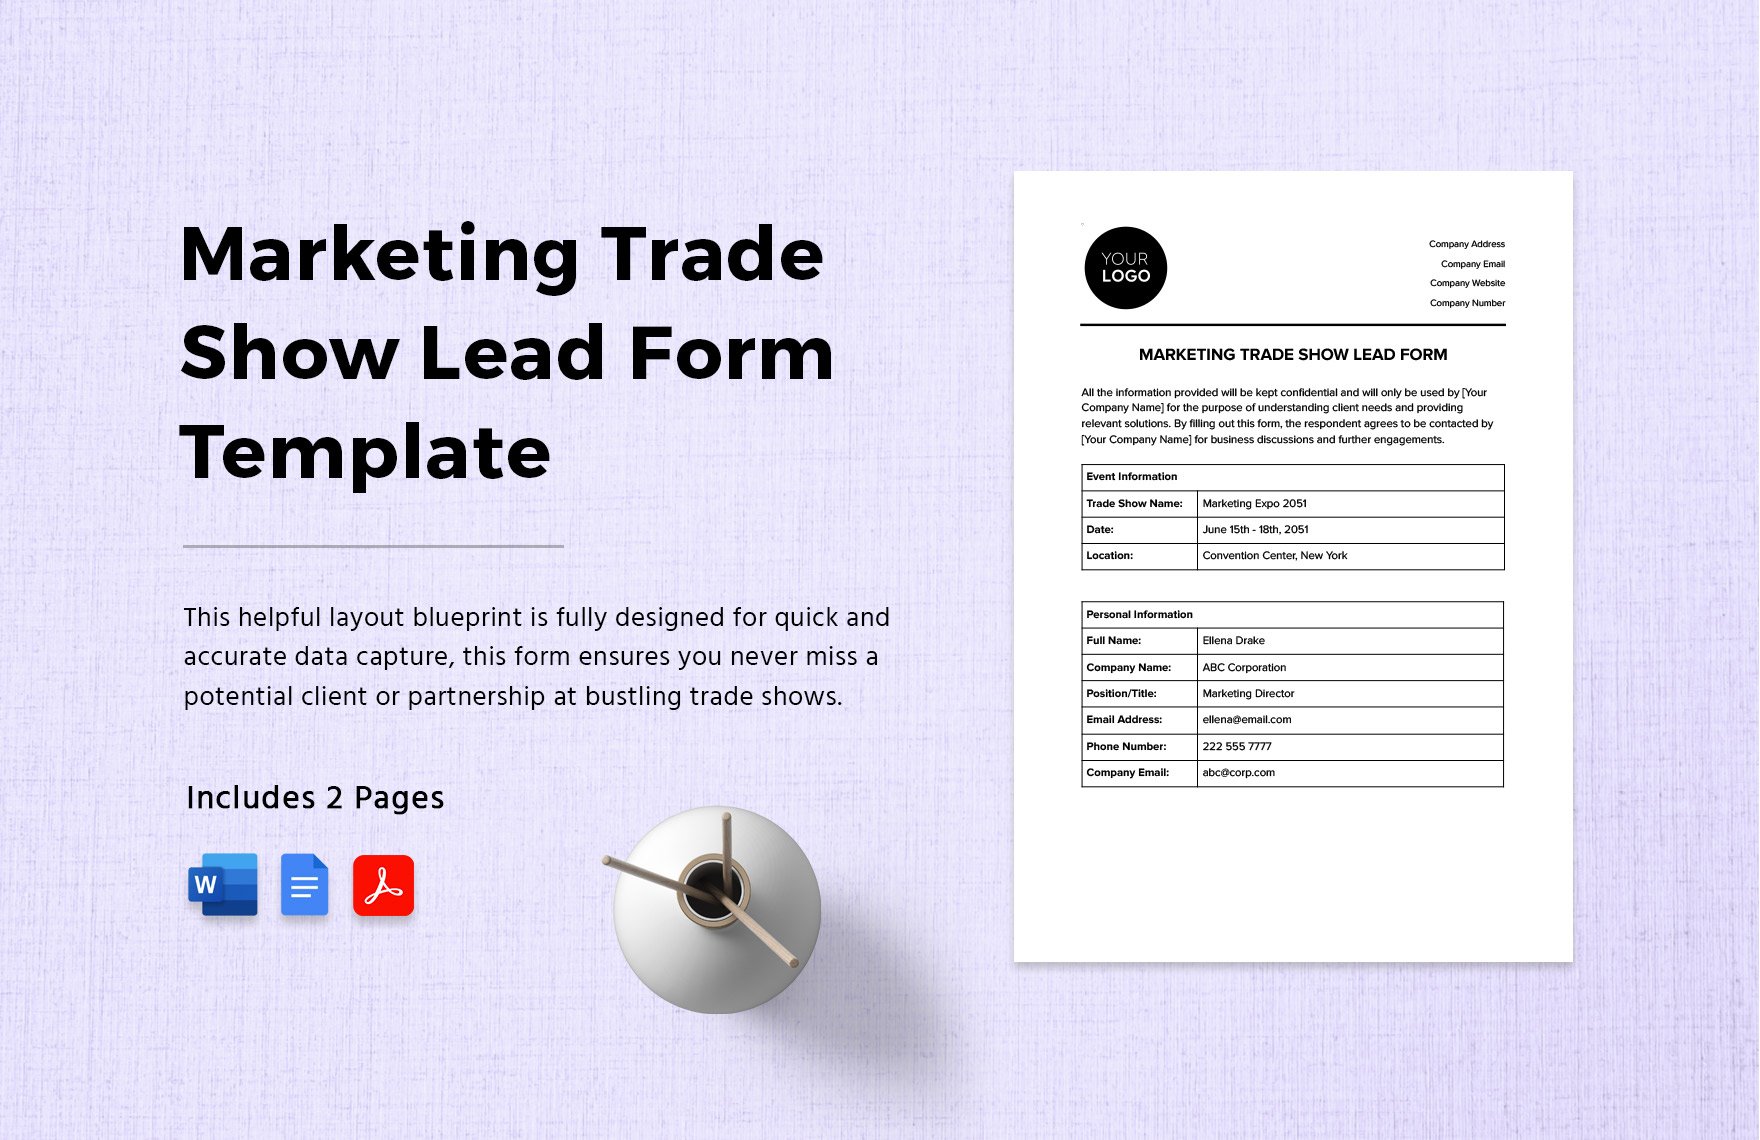 Marketing Trade Show Lead Form Template in Word, Google Docs, PDF